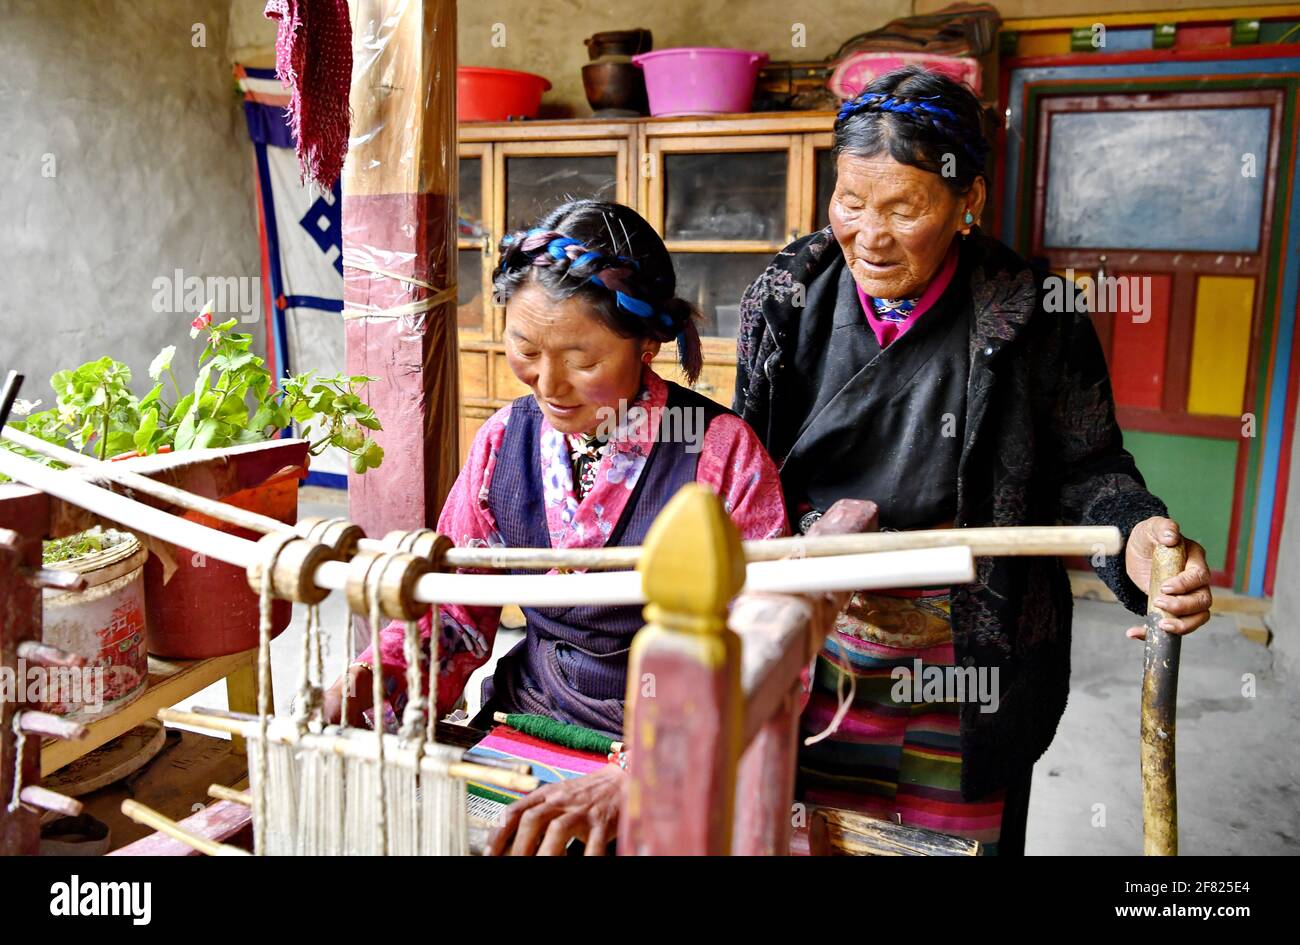 (210411) -- XIGAZE, April 11, 2021 (Xinhua) -- Lhapa (R) teaches her daughter weaving in Puga Village of Xigaze, southwest China's Tibet Autonomous Region, March 20, 2021. Lhapa, born in 1945, is a villager in Puga Village. When she was a child, her mother became blind due to overwork and lost the ability to work. The serf owner drove her out of the manor, and Lhapa's mother had to beg everywhere with her sister for a living. In 1959, during the democratic reform in Tibet, the Lhapa's family were finally reunited and alloted 24 mu (about 1.6 hectare) of land, six sheep and two cows. They al Stock Photo